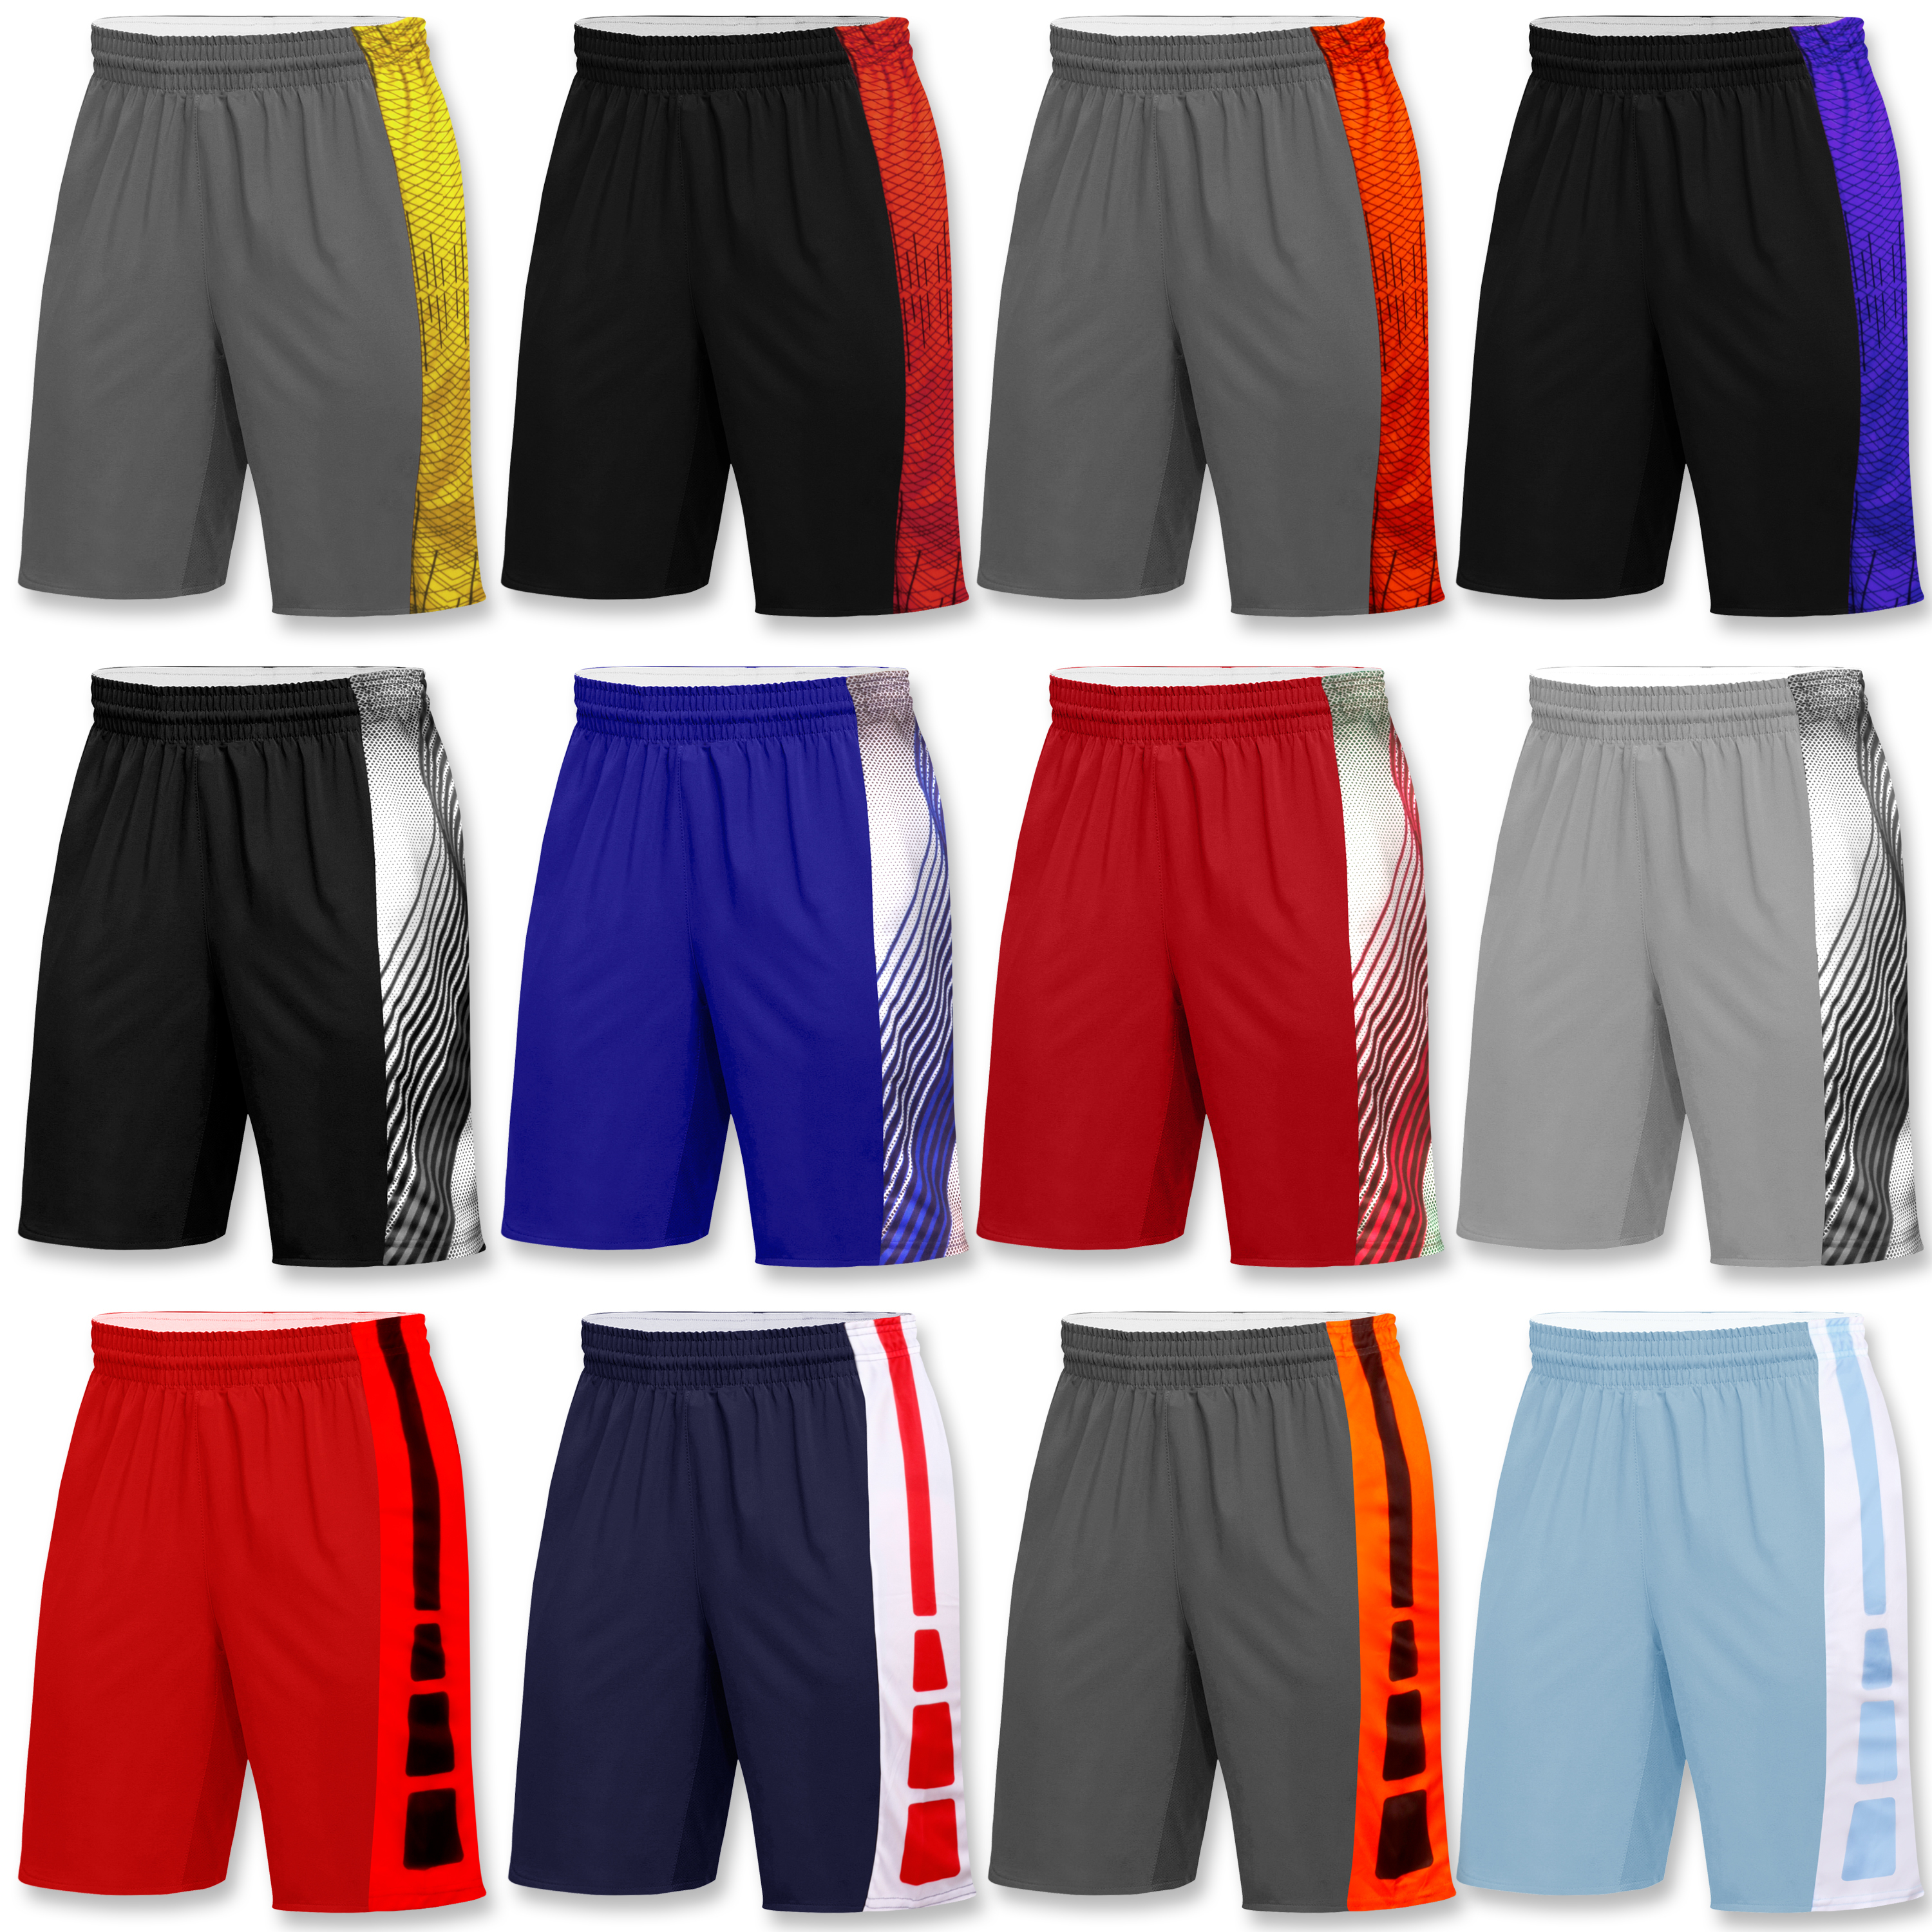 5-Pack Mystery Deal: Men's Active Athletic Performance Shorts - Medium